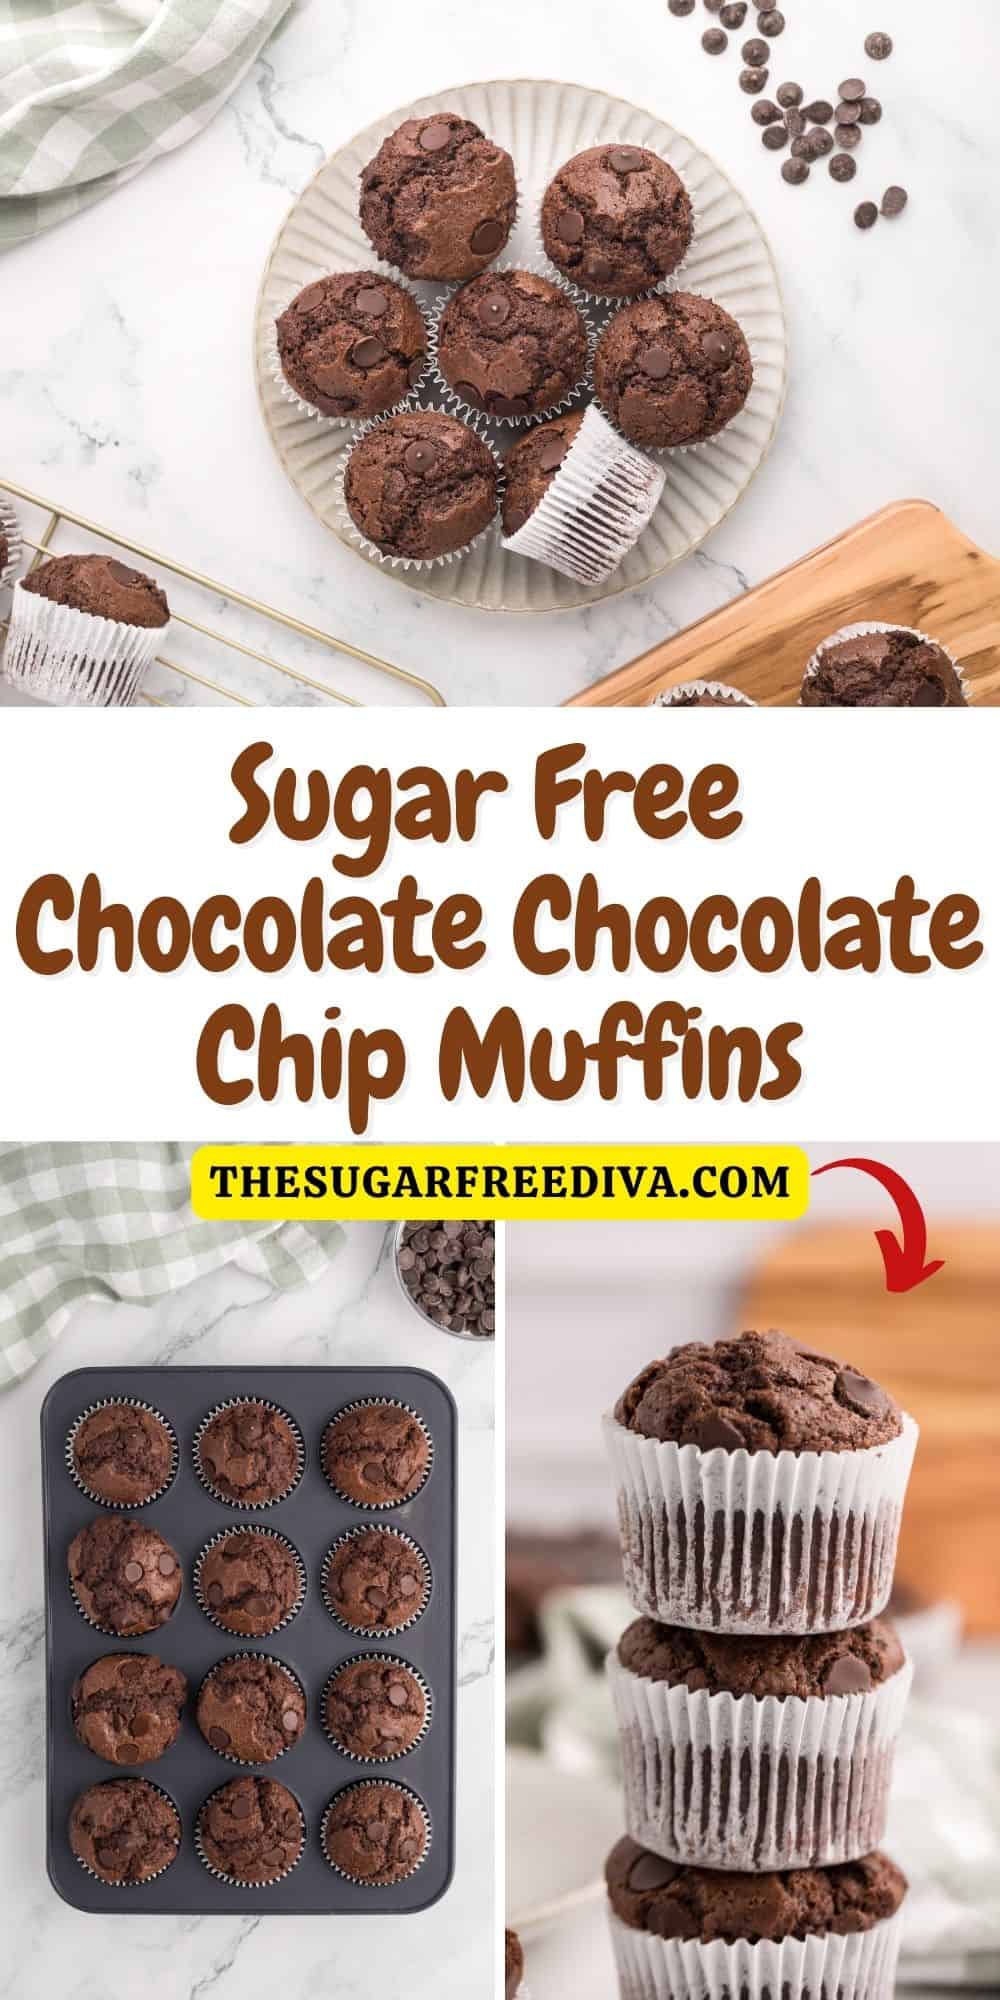 Sugar Free Chocolate Chocolate Chip Muffins (double chocolate), a simple and decadent recipe that is perfect for breakfast, brunch, or snacking on. Keto option.